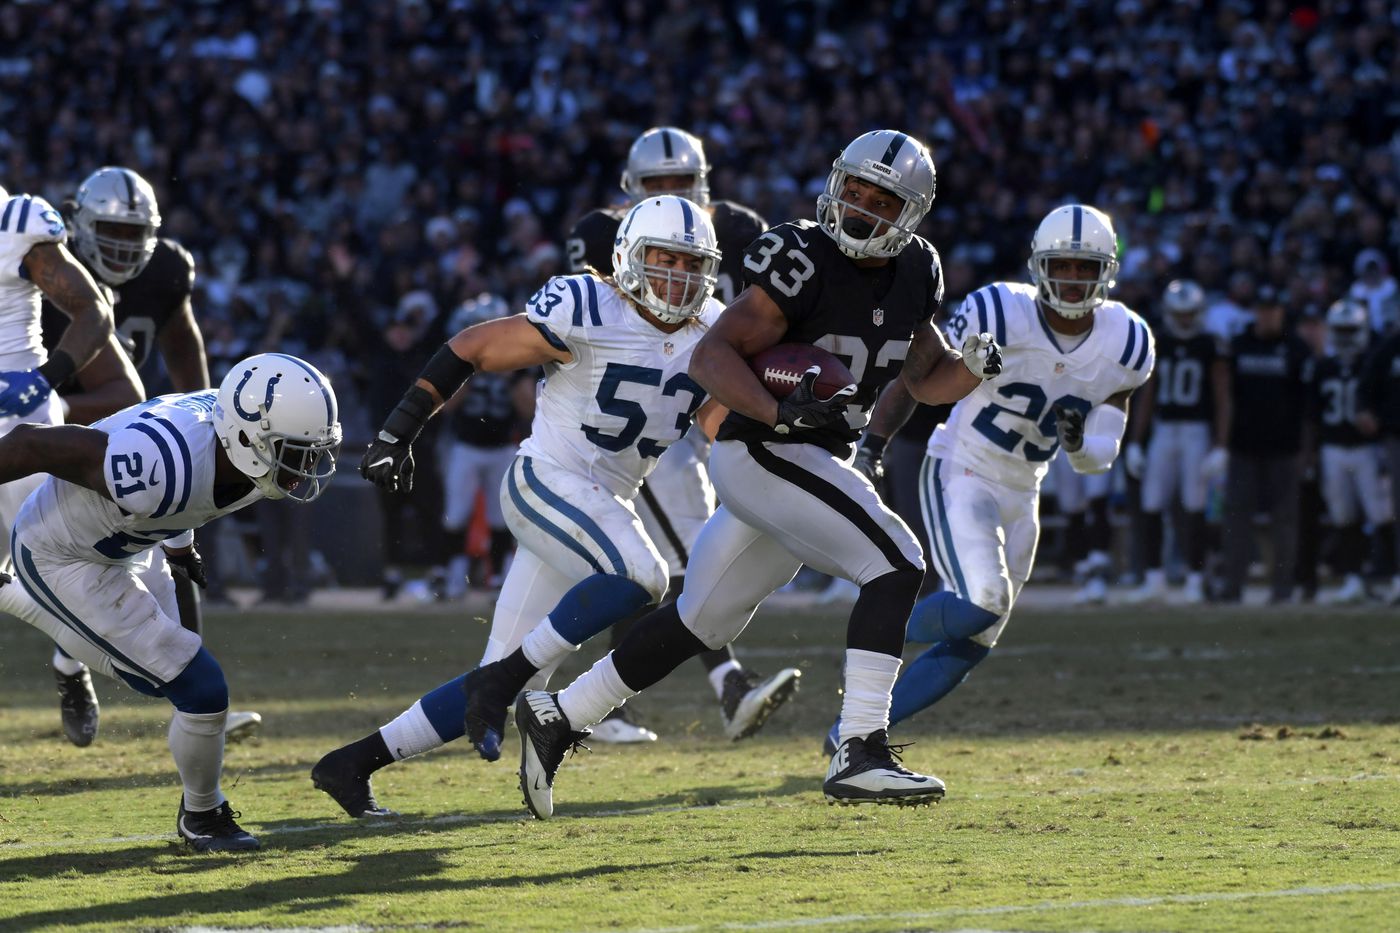 Raiders-Colts viewing guide: Game time, TV schedule, online